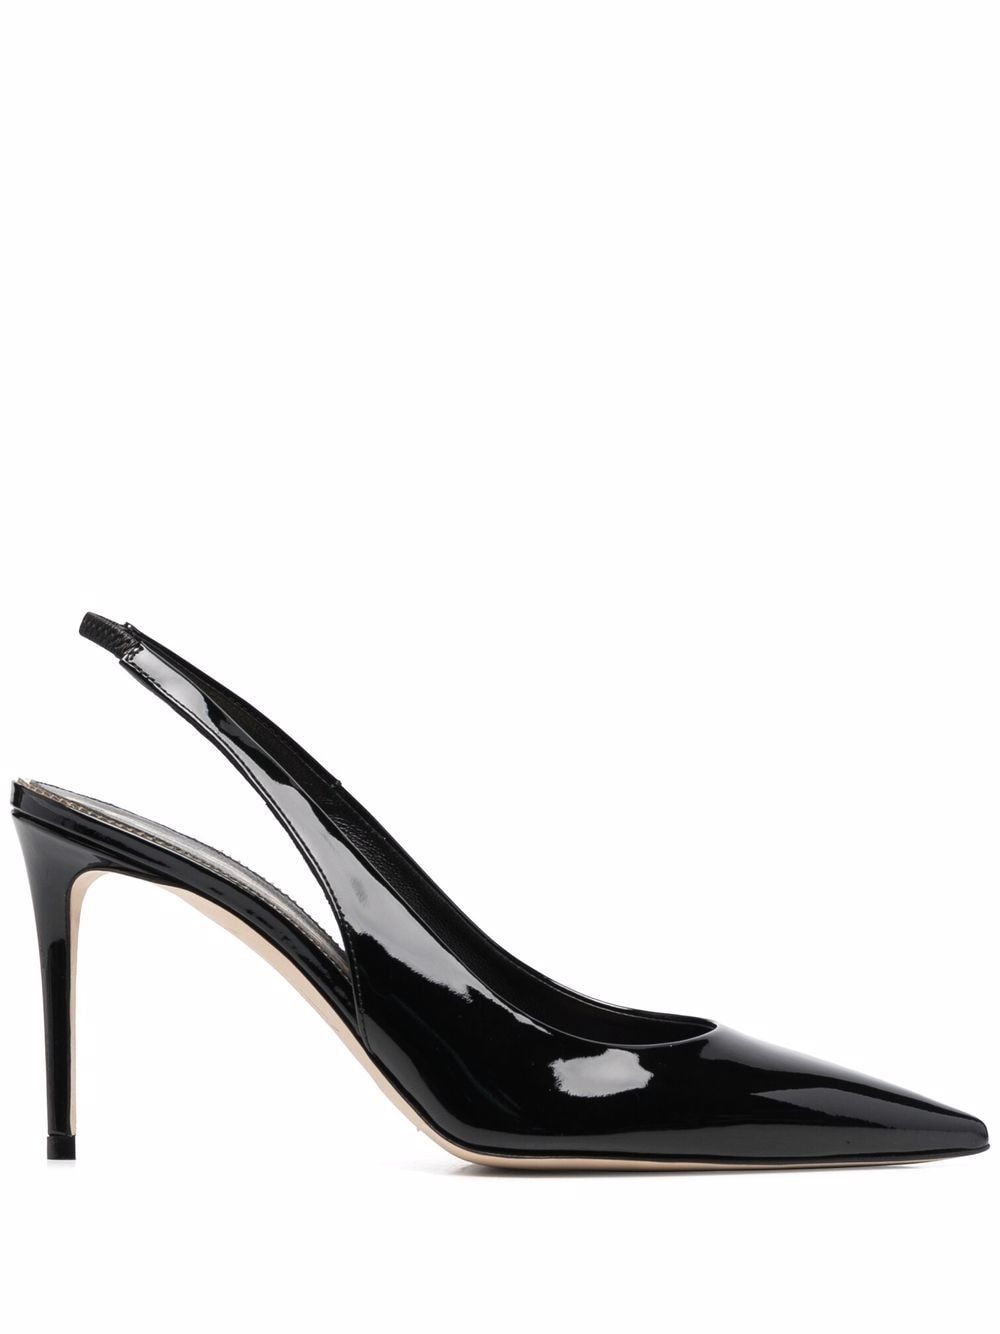 x Brian Atwood Sutton slingback pumps